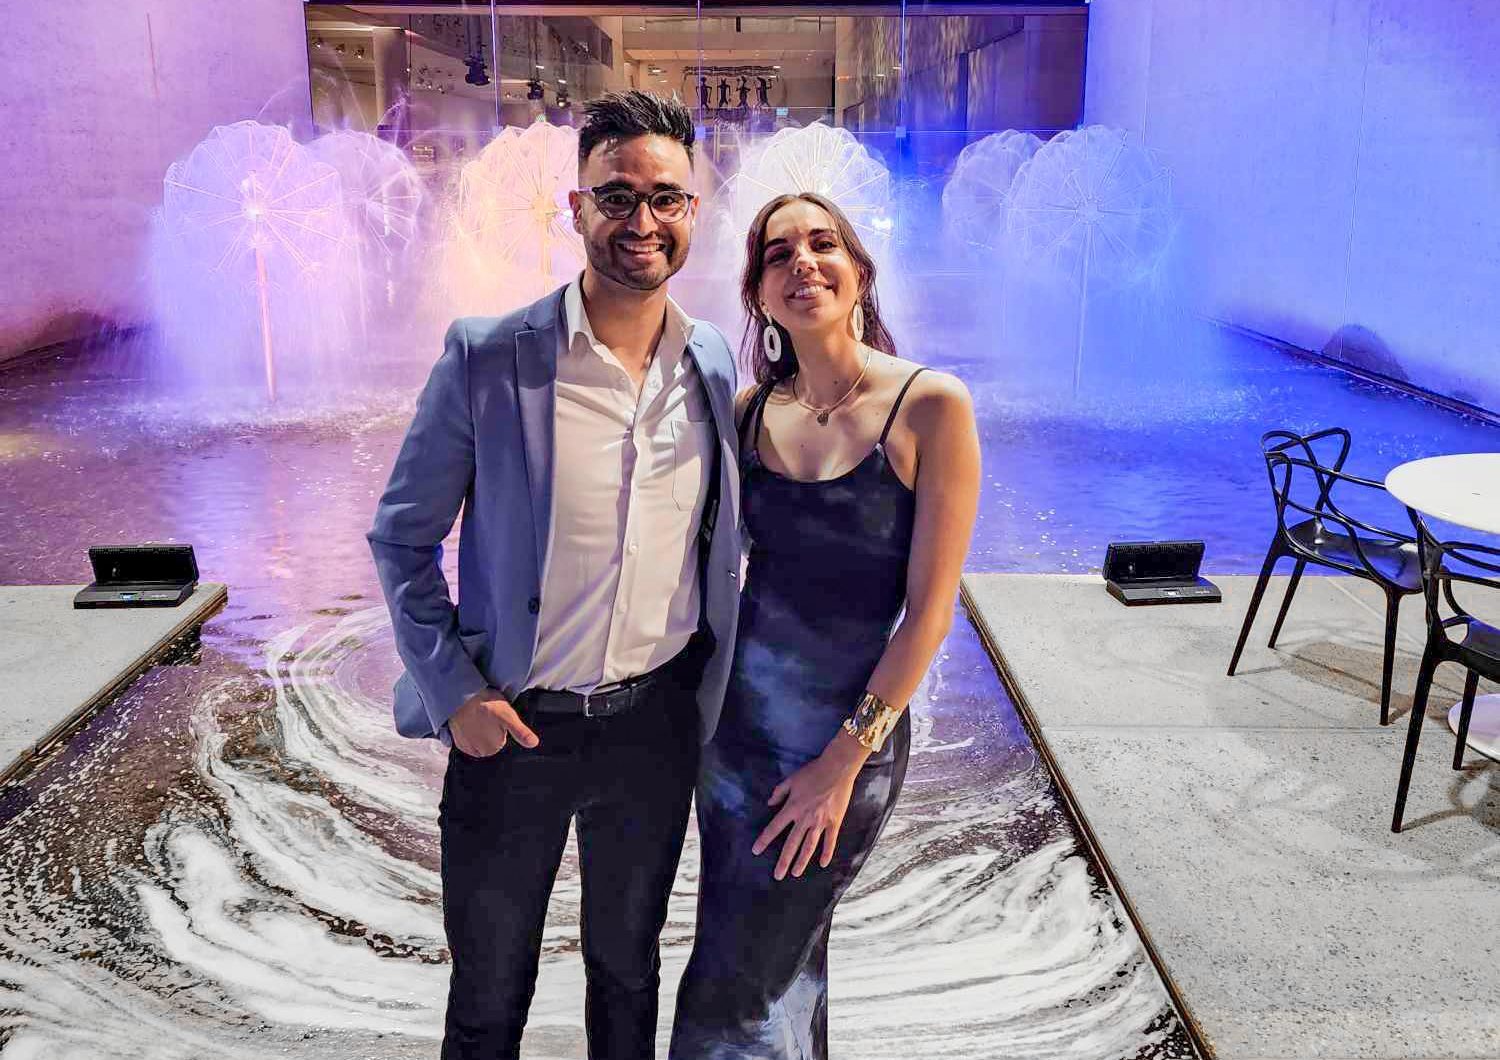 Brisbane wedding band duo act Uncovered posing in front of a water feature.